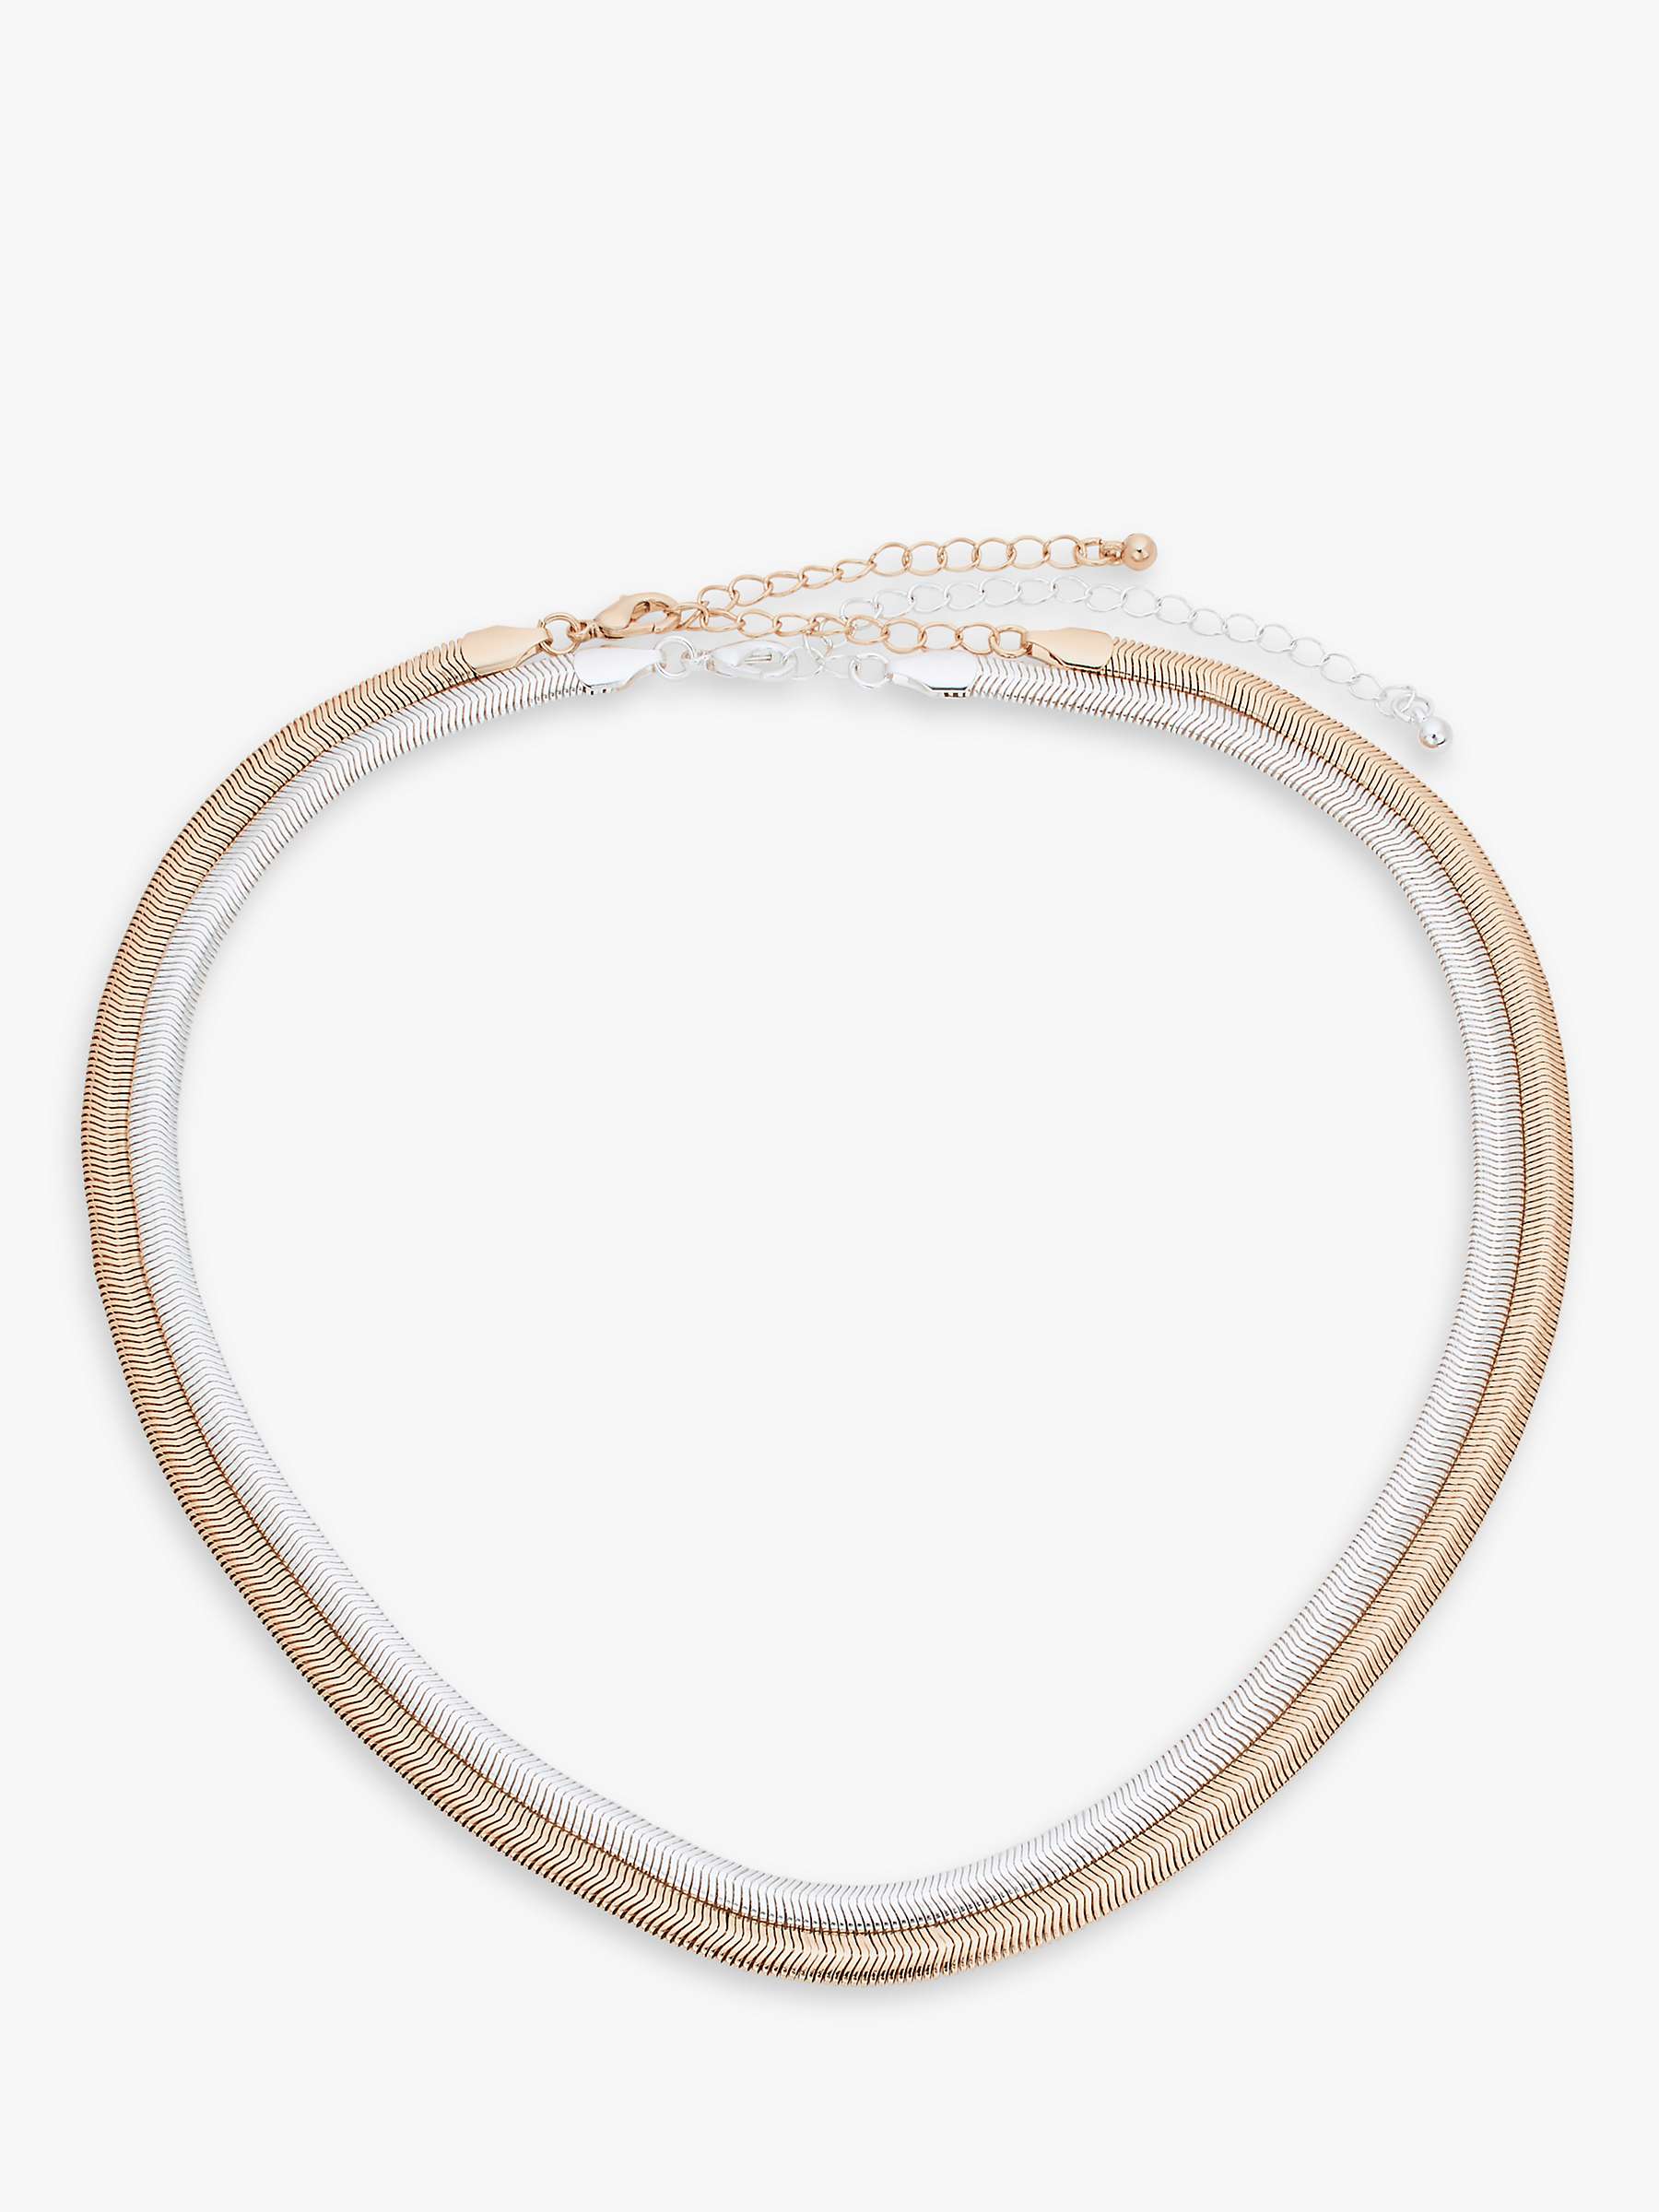 Buy John Lewis Snake Chain Collar Necklace, Set of 2, Gold/Silver Online at johnlewis.com